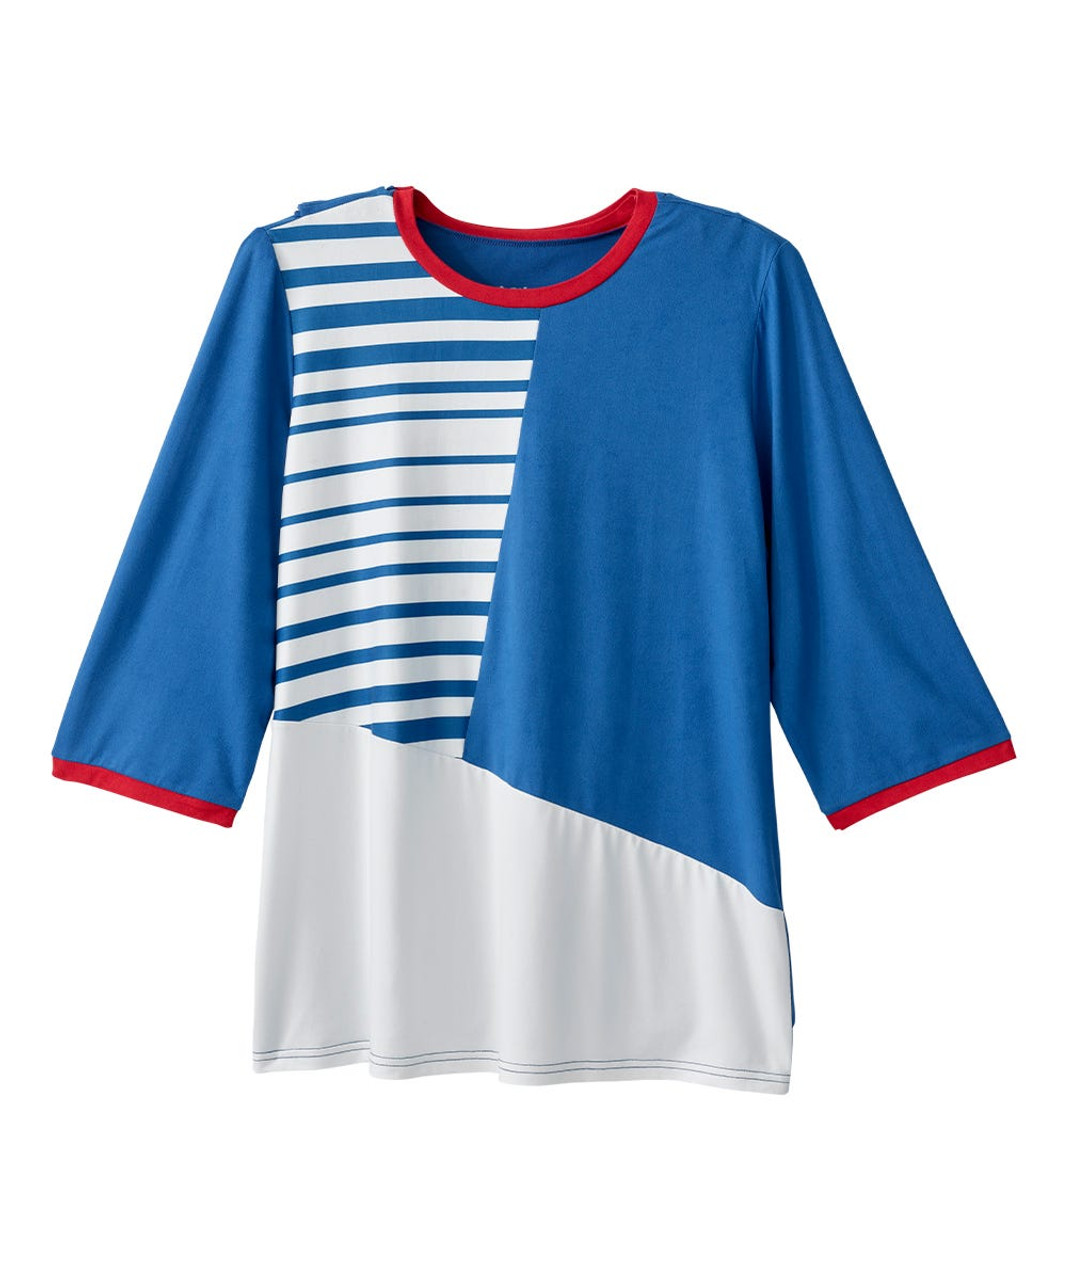 Silverts SV140 Top Color Block Open Back Electric Blue/Red/White, Size=L, SV140-SV2008-L